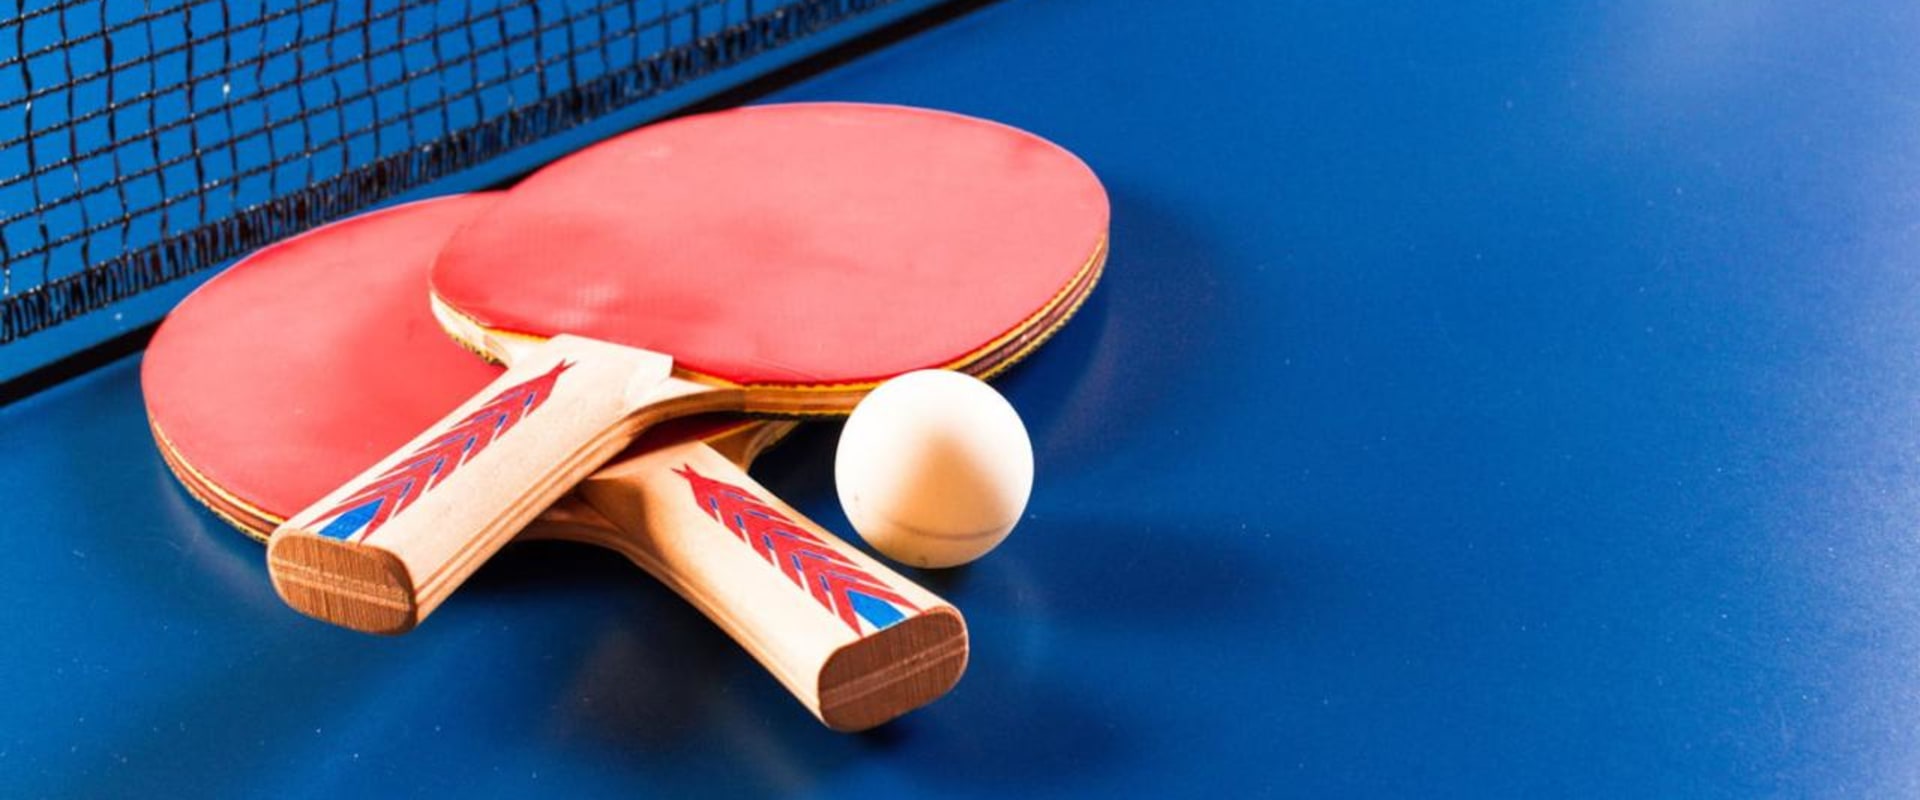 Ping Pong vs Table Tennis: What's the Difference?